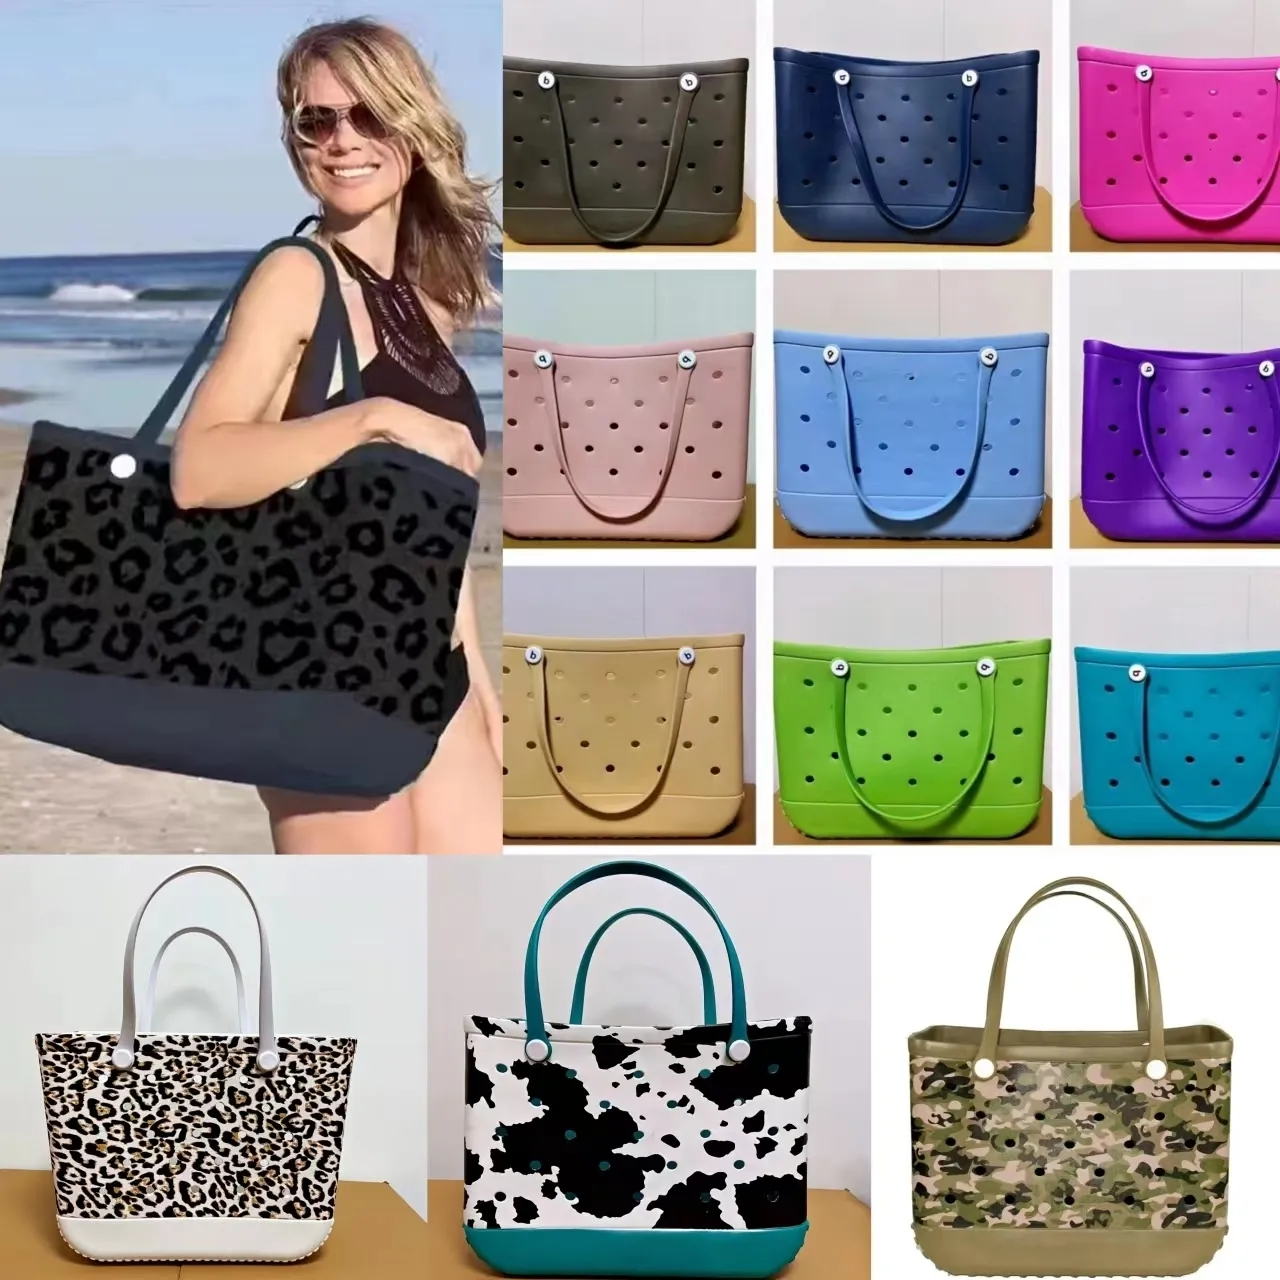 Shopping Bags Bogge Bags Extras Large Boggs Beach Bag Silicon Beach Tote Bag Rubber With Holes Bogge Bags Beach XL Sac à main Designer 230719